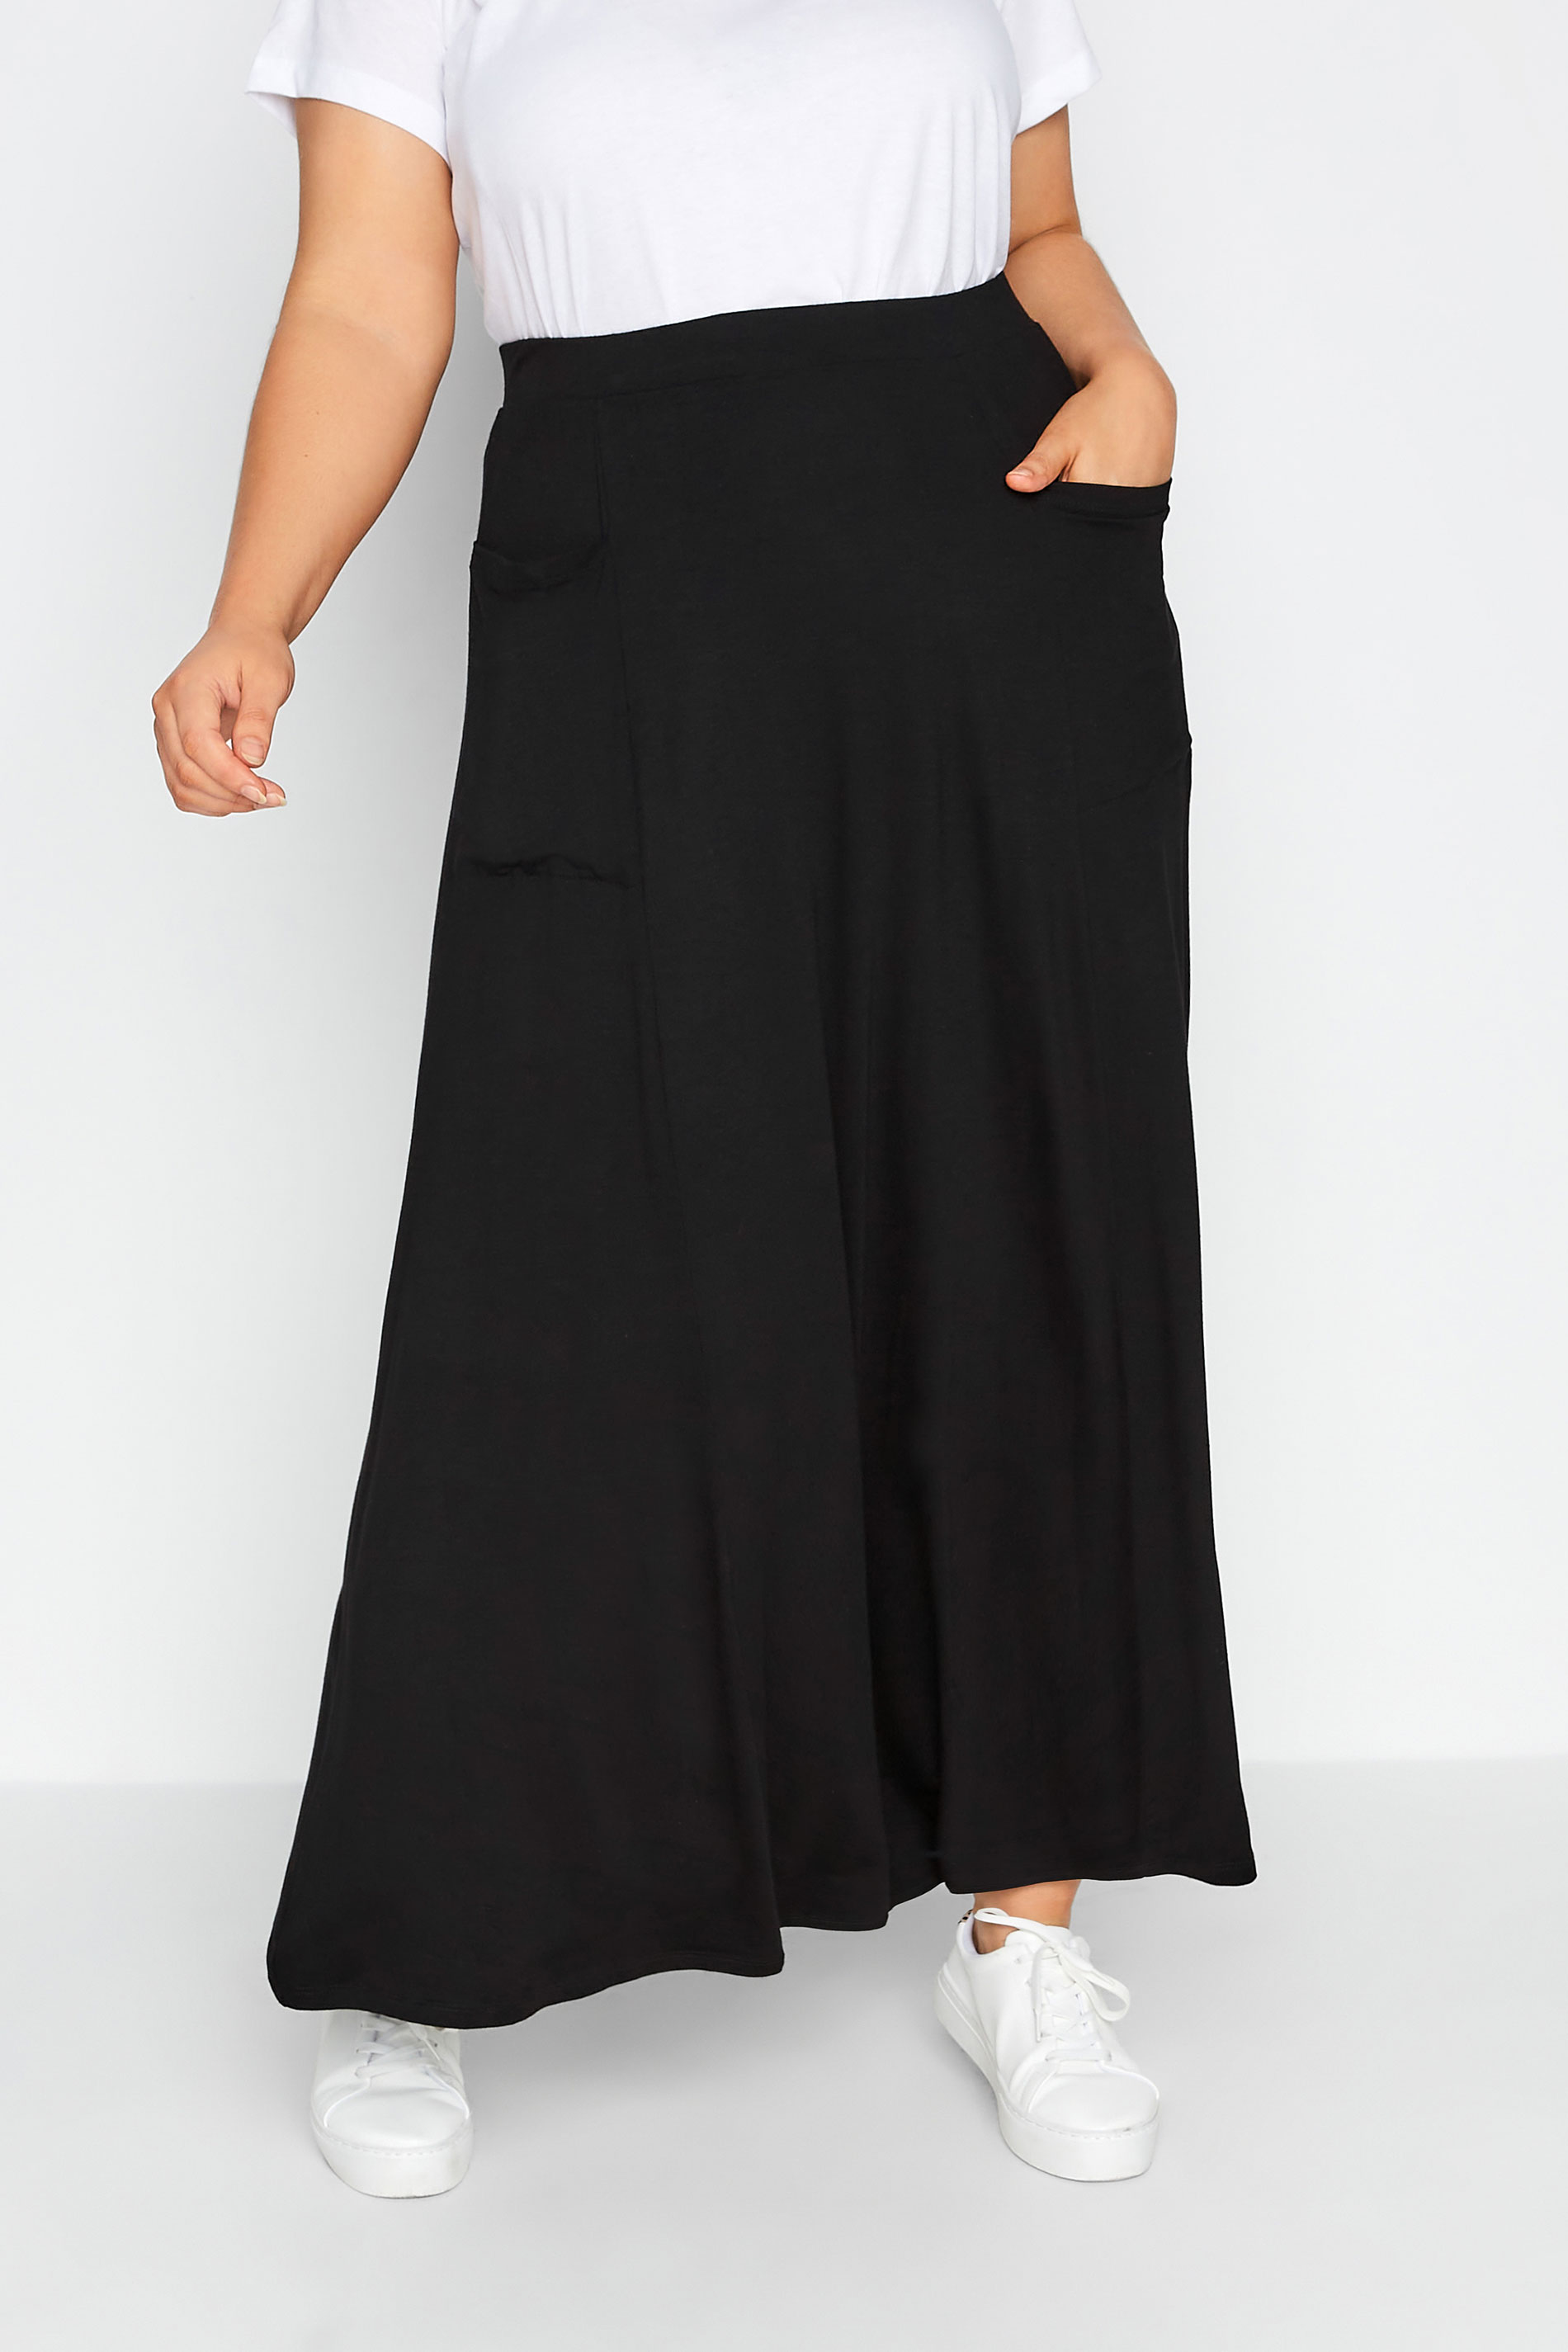 Black Maxi Jersey Strtech Skirt With Pockets, Plus size 16 to 36 1